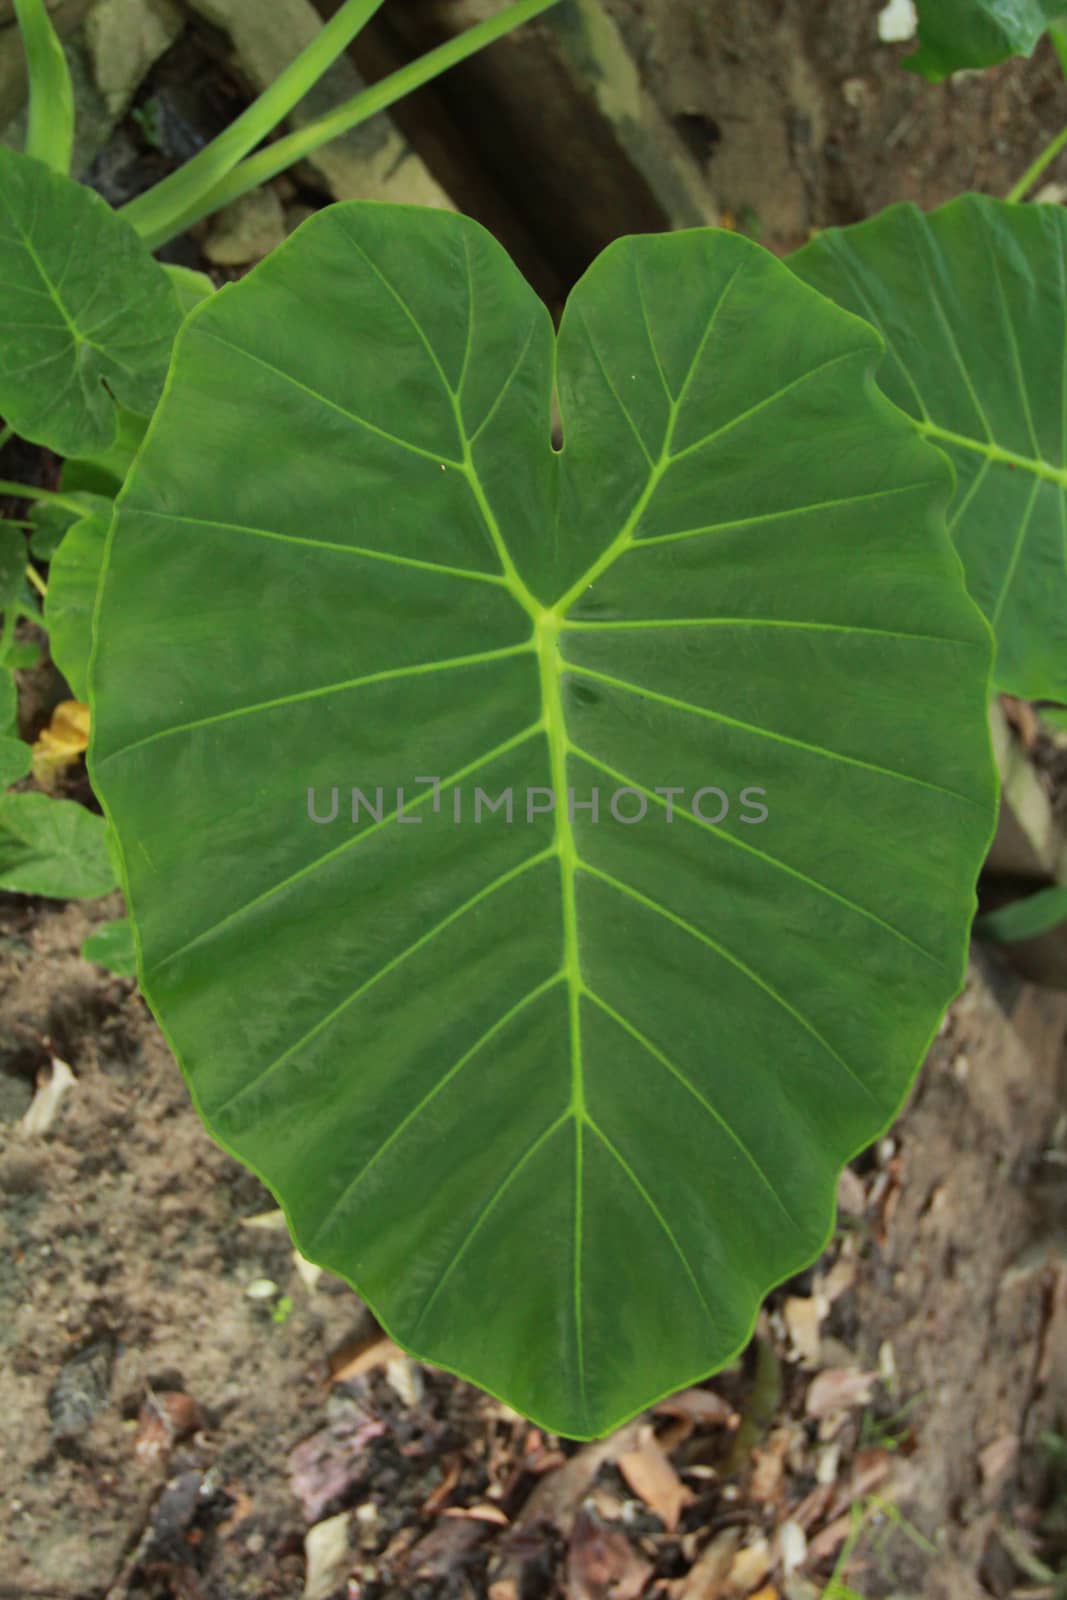 Taro have science name is Colocasia esculenta Schott. Tree falling, there was in the age of underground stems for several years. Several groups are lined up along the Nile River, about 70 high-120 cm underground stems include sub headings and around larger head.